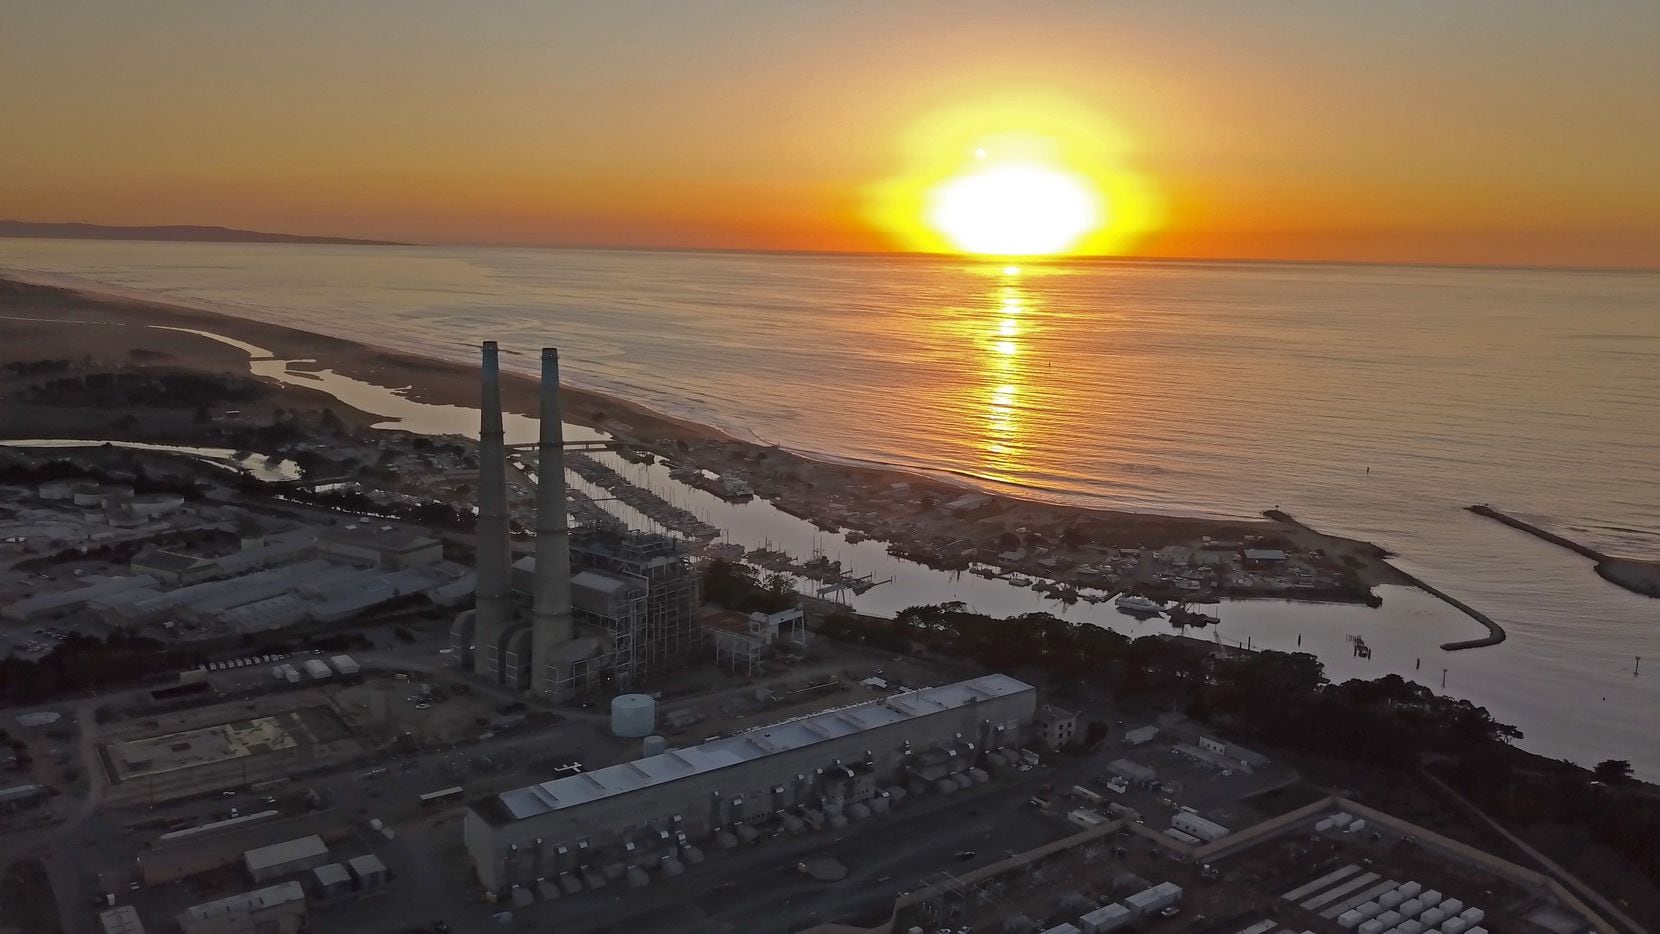 Vistra Corp. has built the world's largest battery storage project on an old power plant...